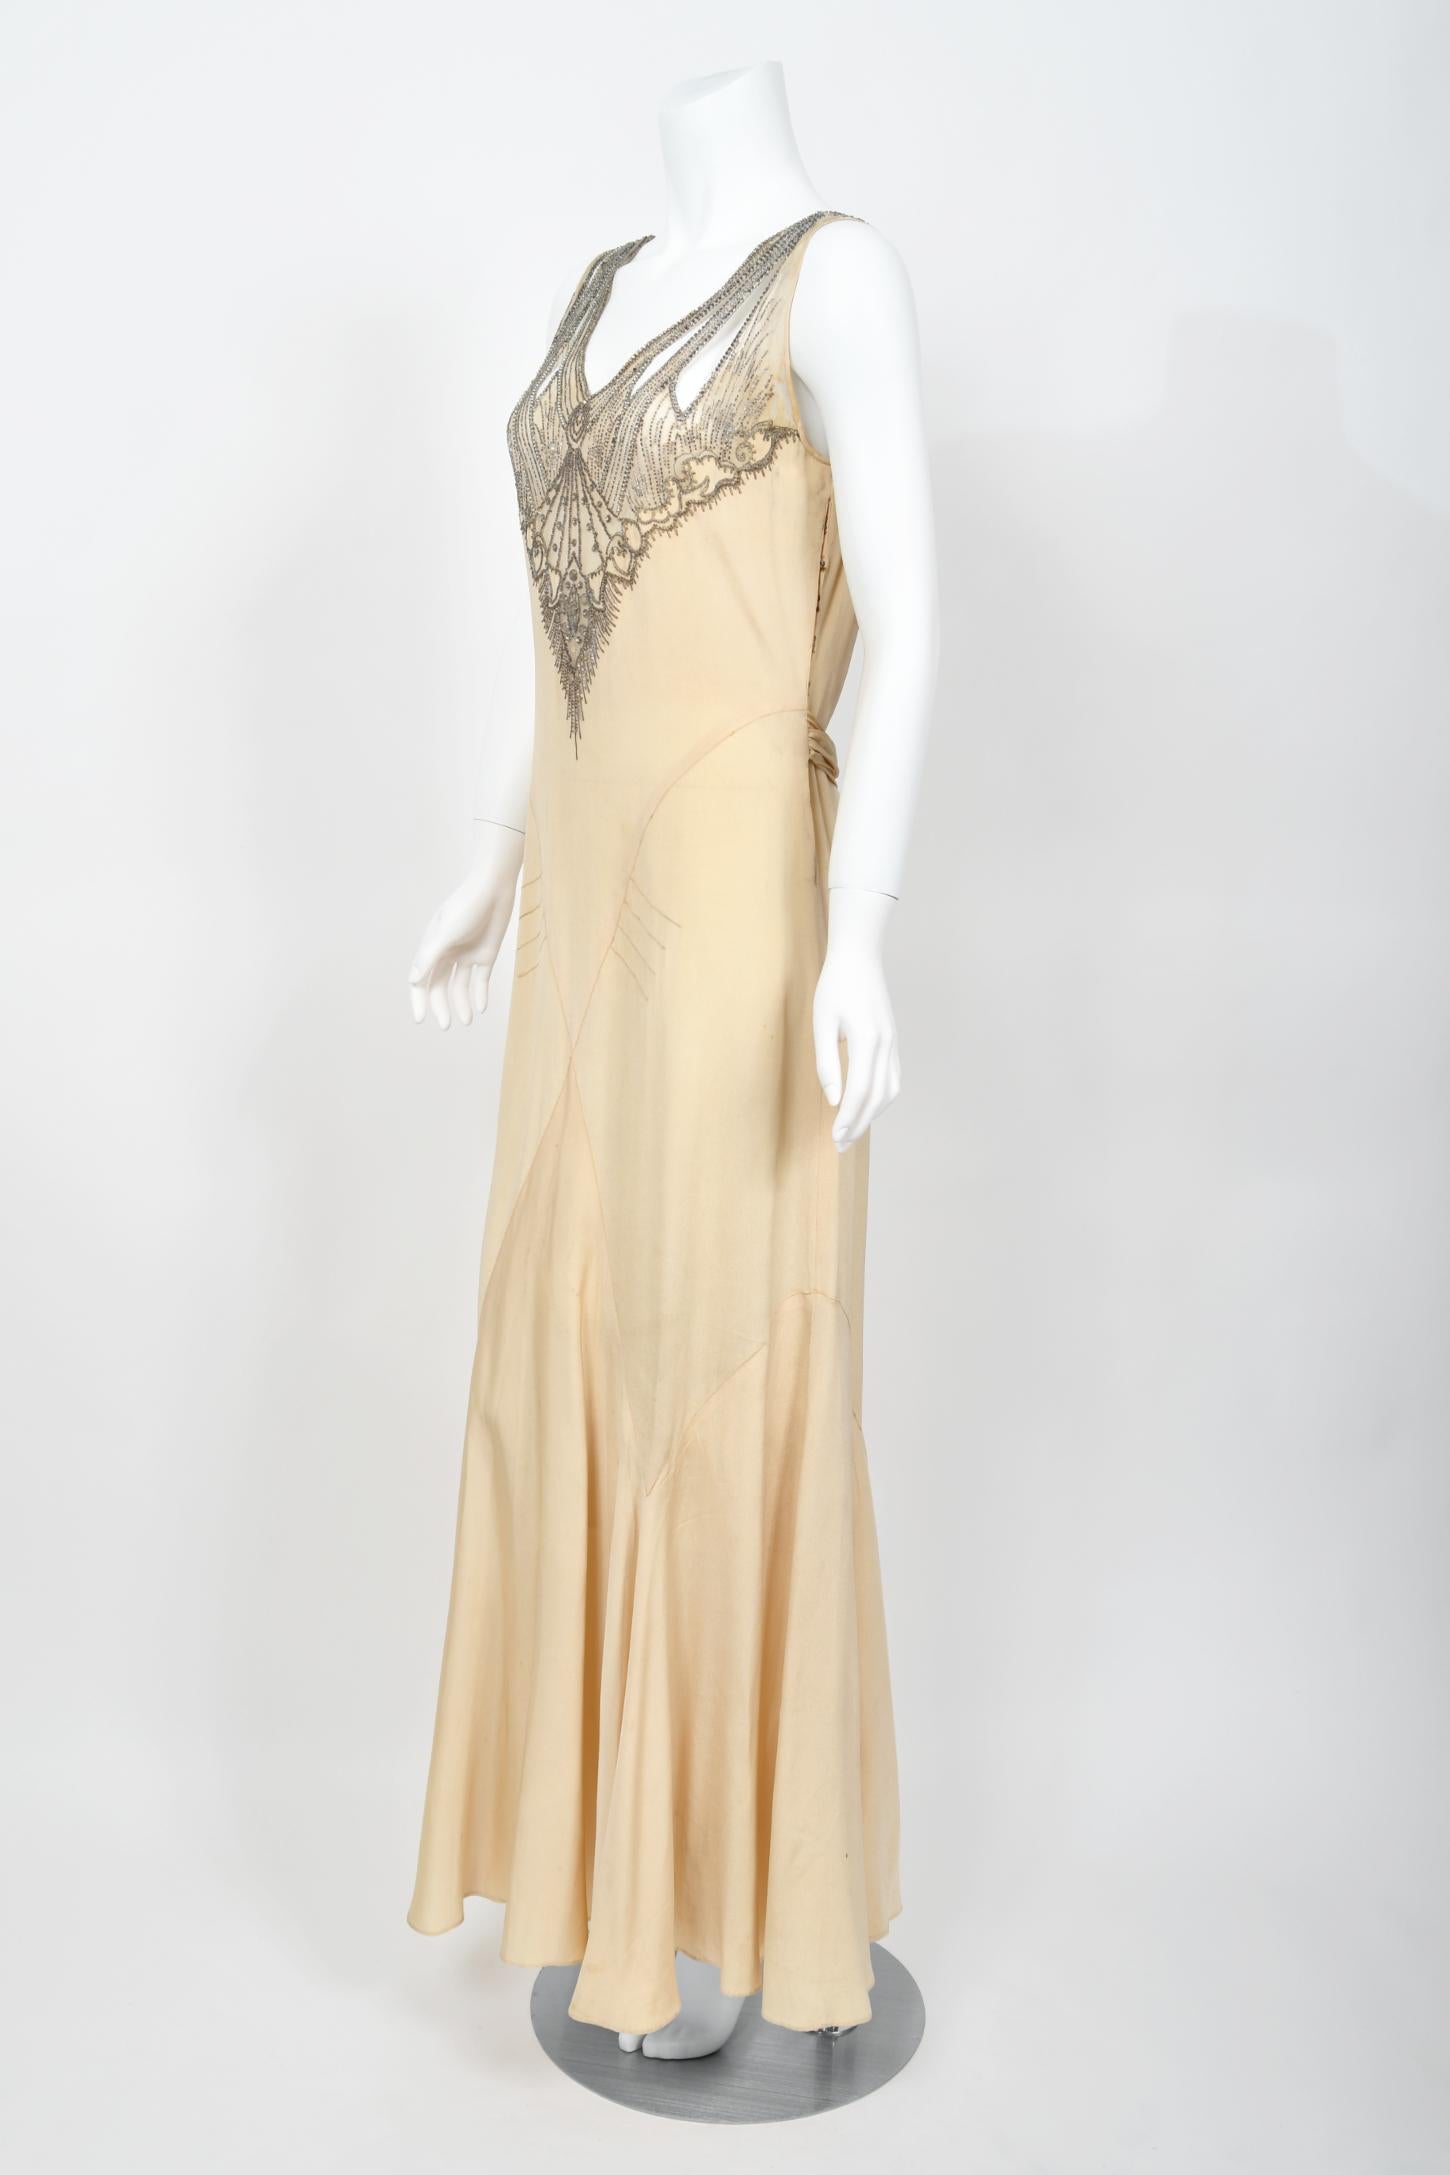 1930's French Ivory Creme Silk Beaded Sheer Illusion Deco Bias-Cut Bridal Gown   For Sale 5